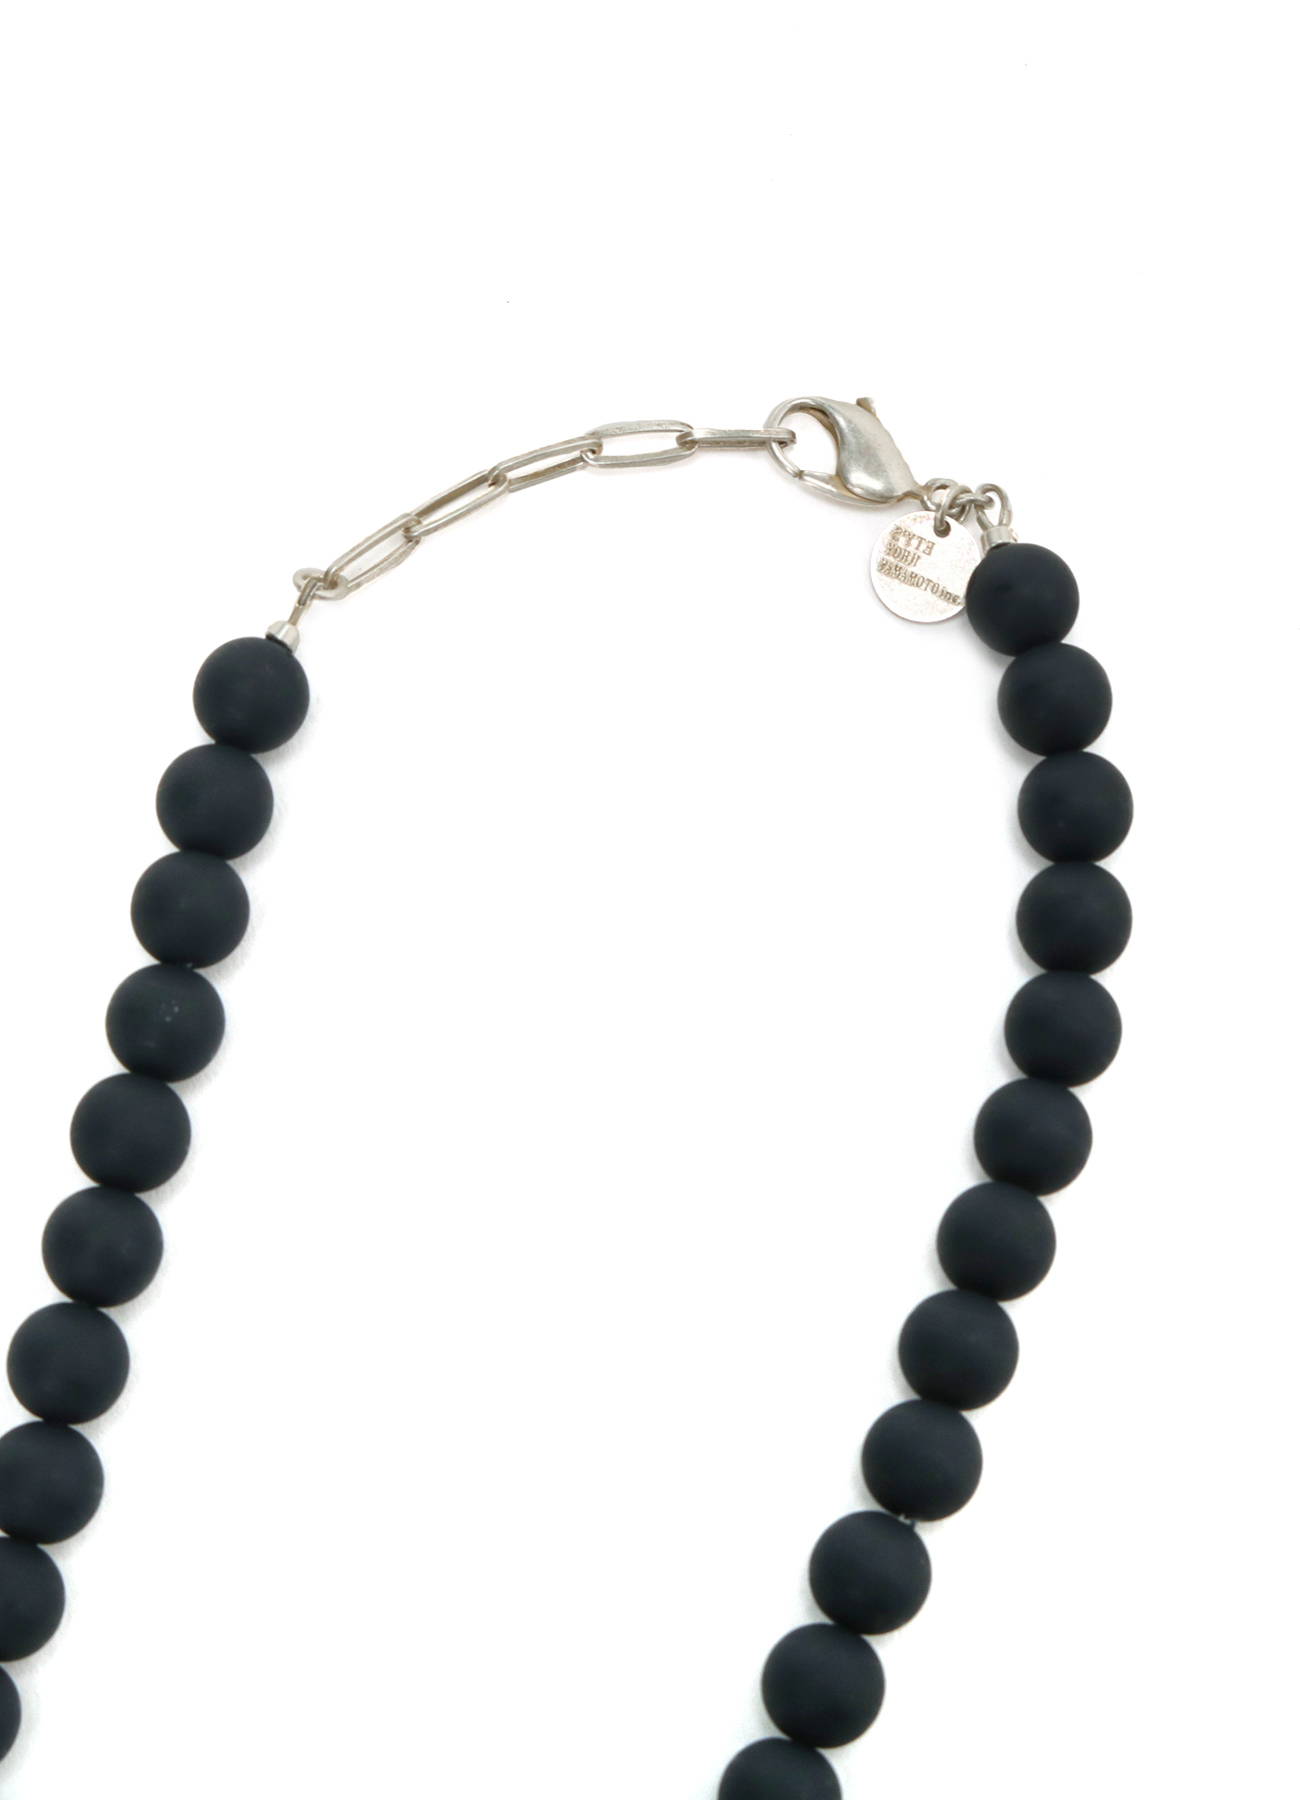 CRYSTAL + BLACK BEADS NECKLACE